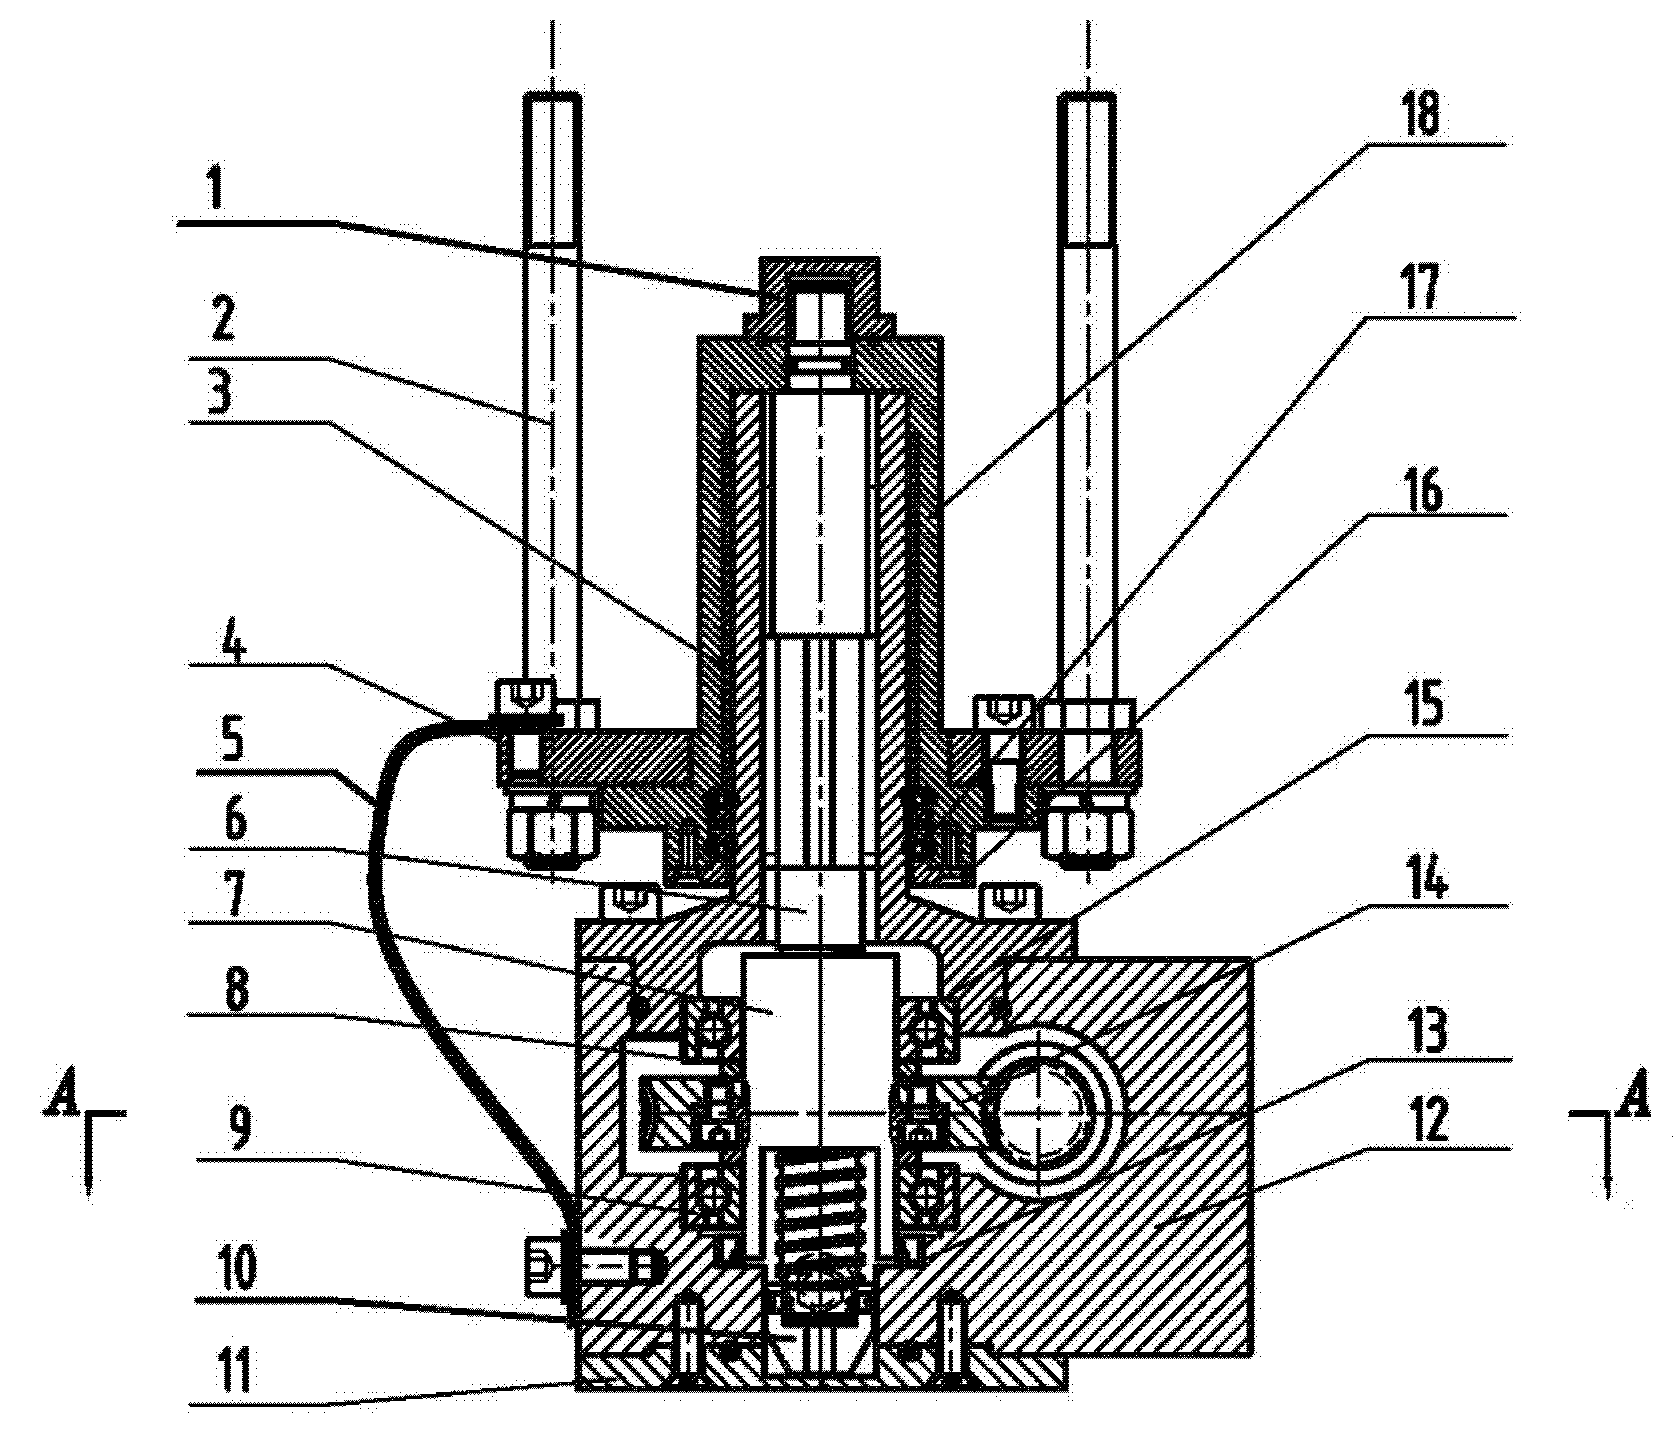 Electric actuator for actively adjusting main reflection face of large-size radio telescope